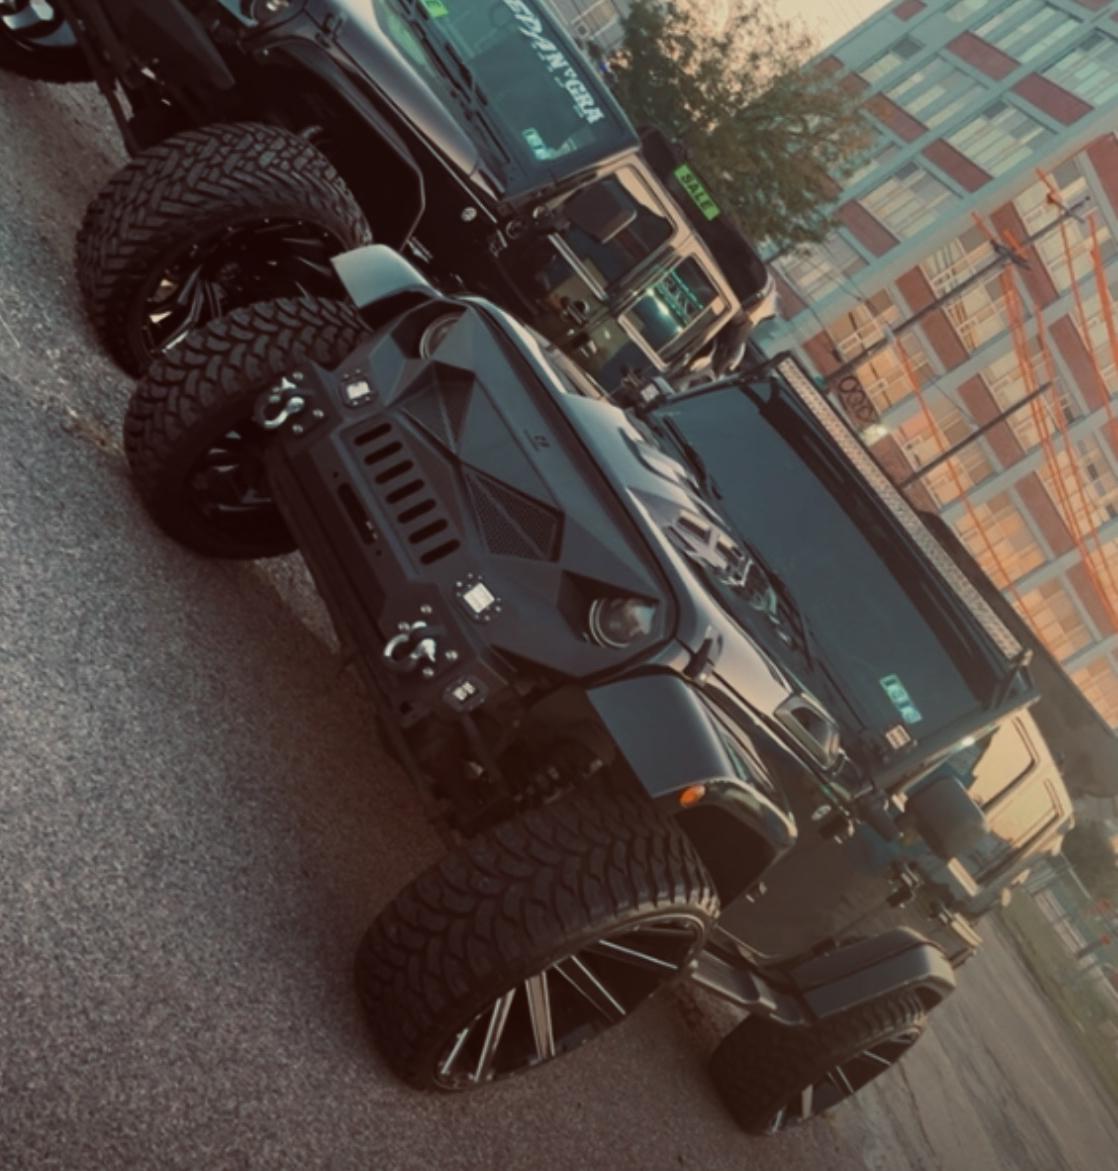 JEEP WRANGLER💋's images